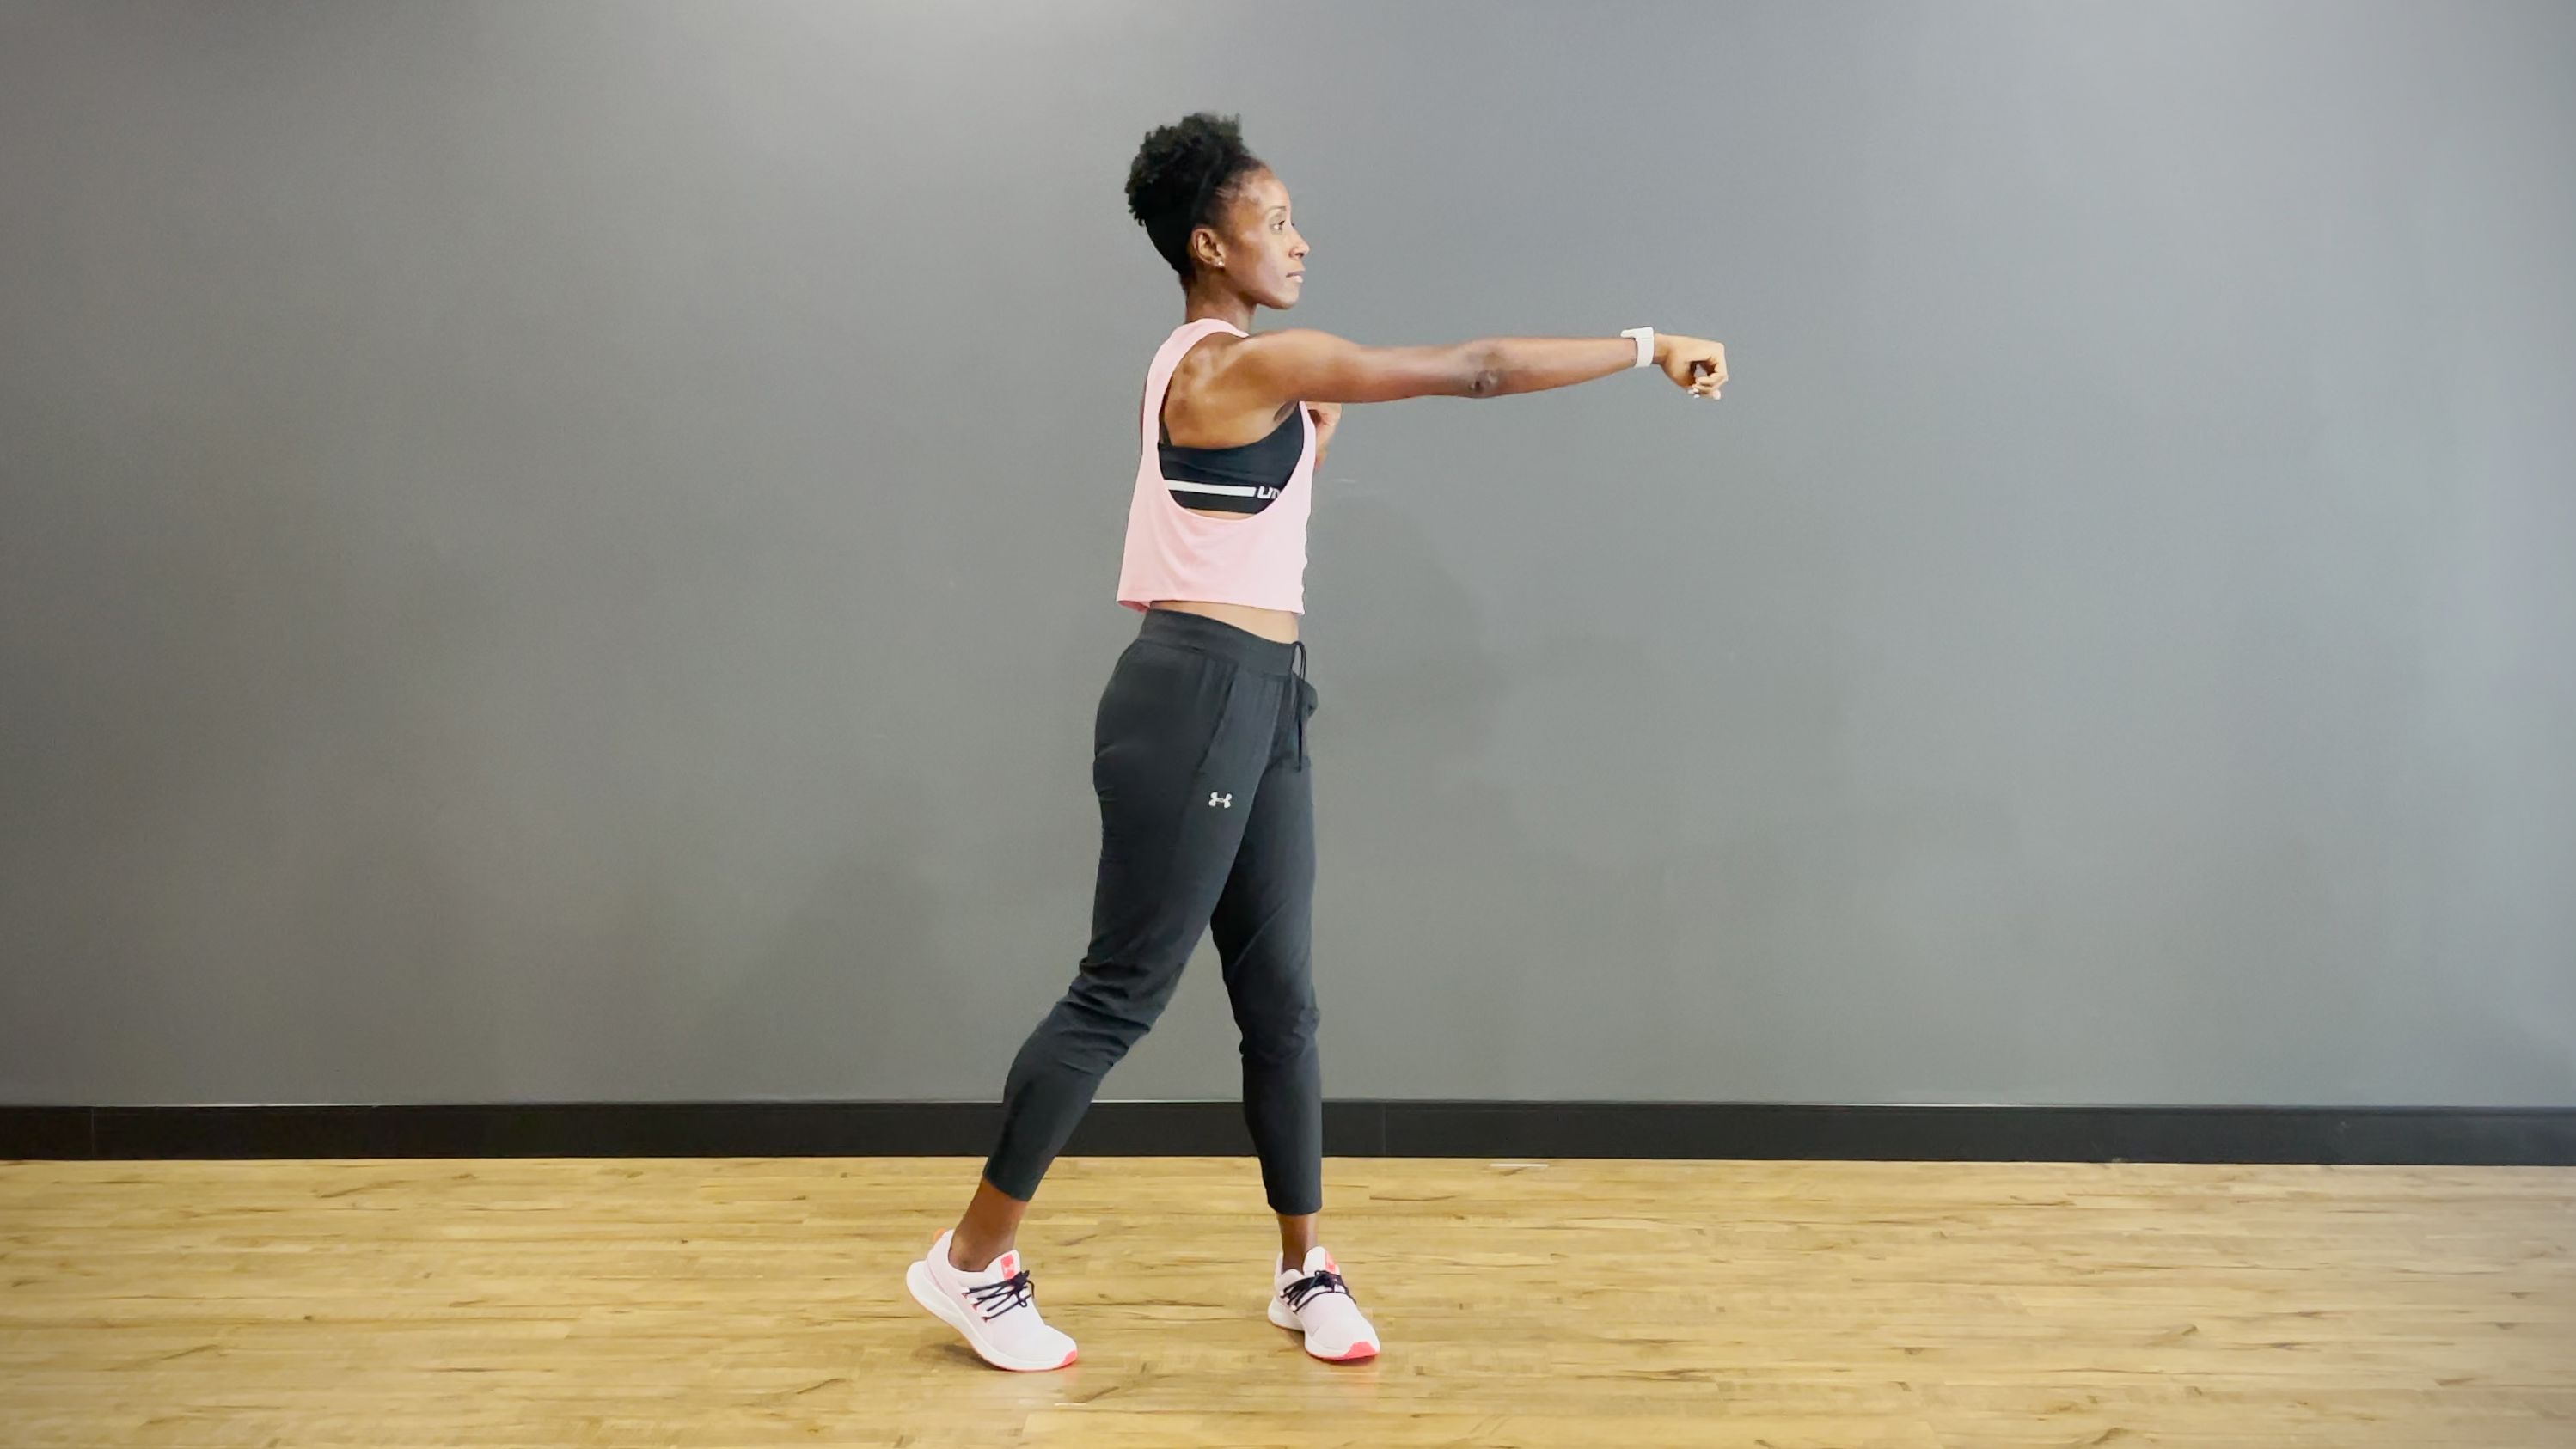 This Week's Workout: Situp punch works core and arms